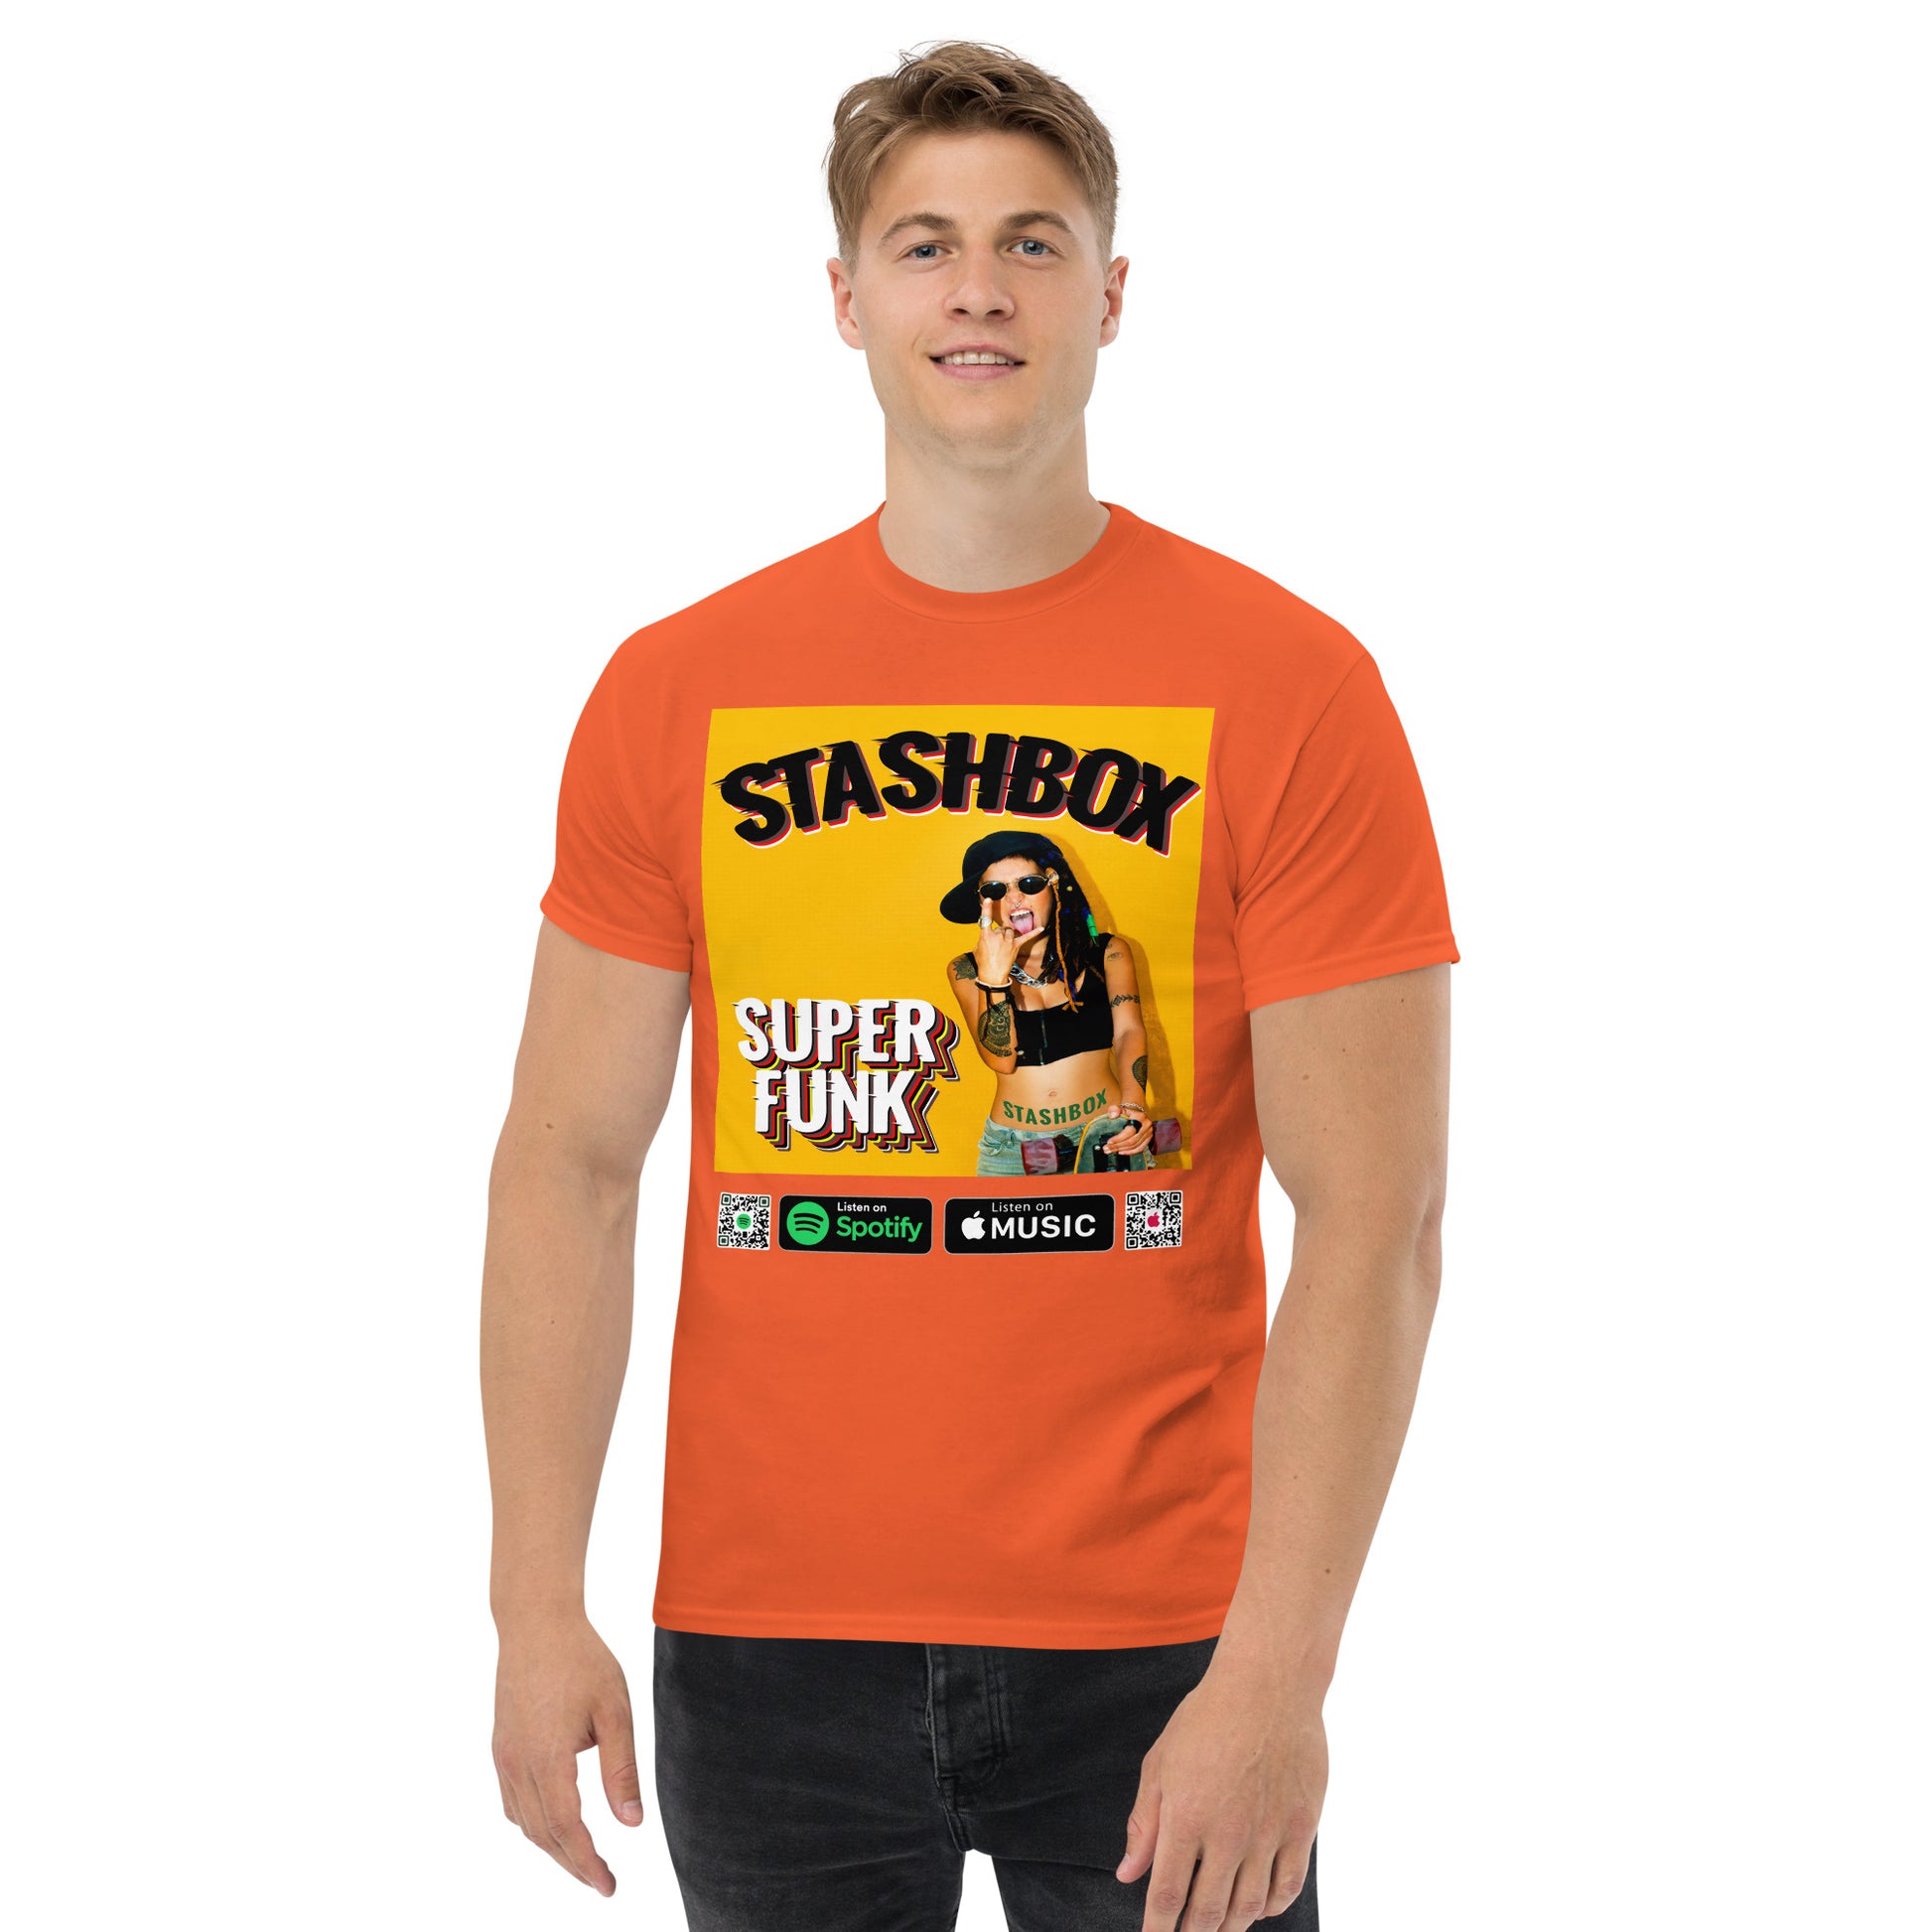 Funk Up Your Wardrobe: Super Funk Men's Classic Tee by Stashbox. Elevate your fashion game with the essence of funk. This tee captures the funky spirit, making it a must-have for music enthusiasts. Let your wardrobe groove. #FunkyTeeStyle #MusicFueledFashion #StashboxGroove